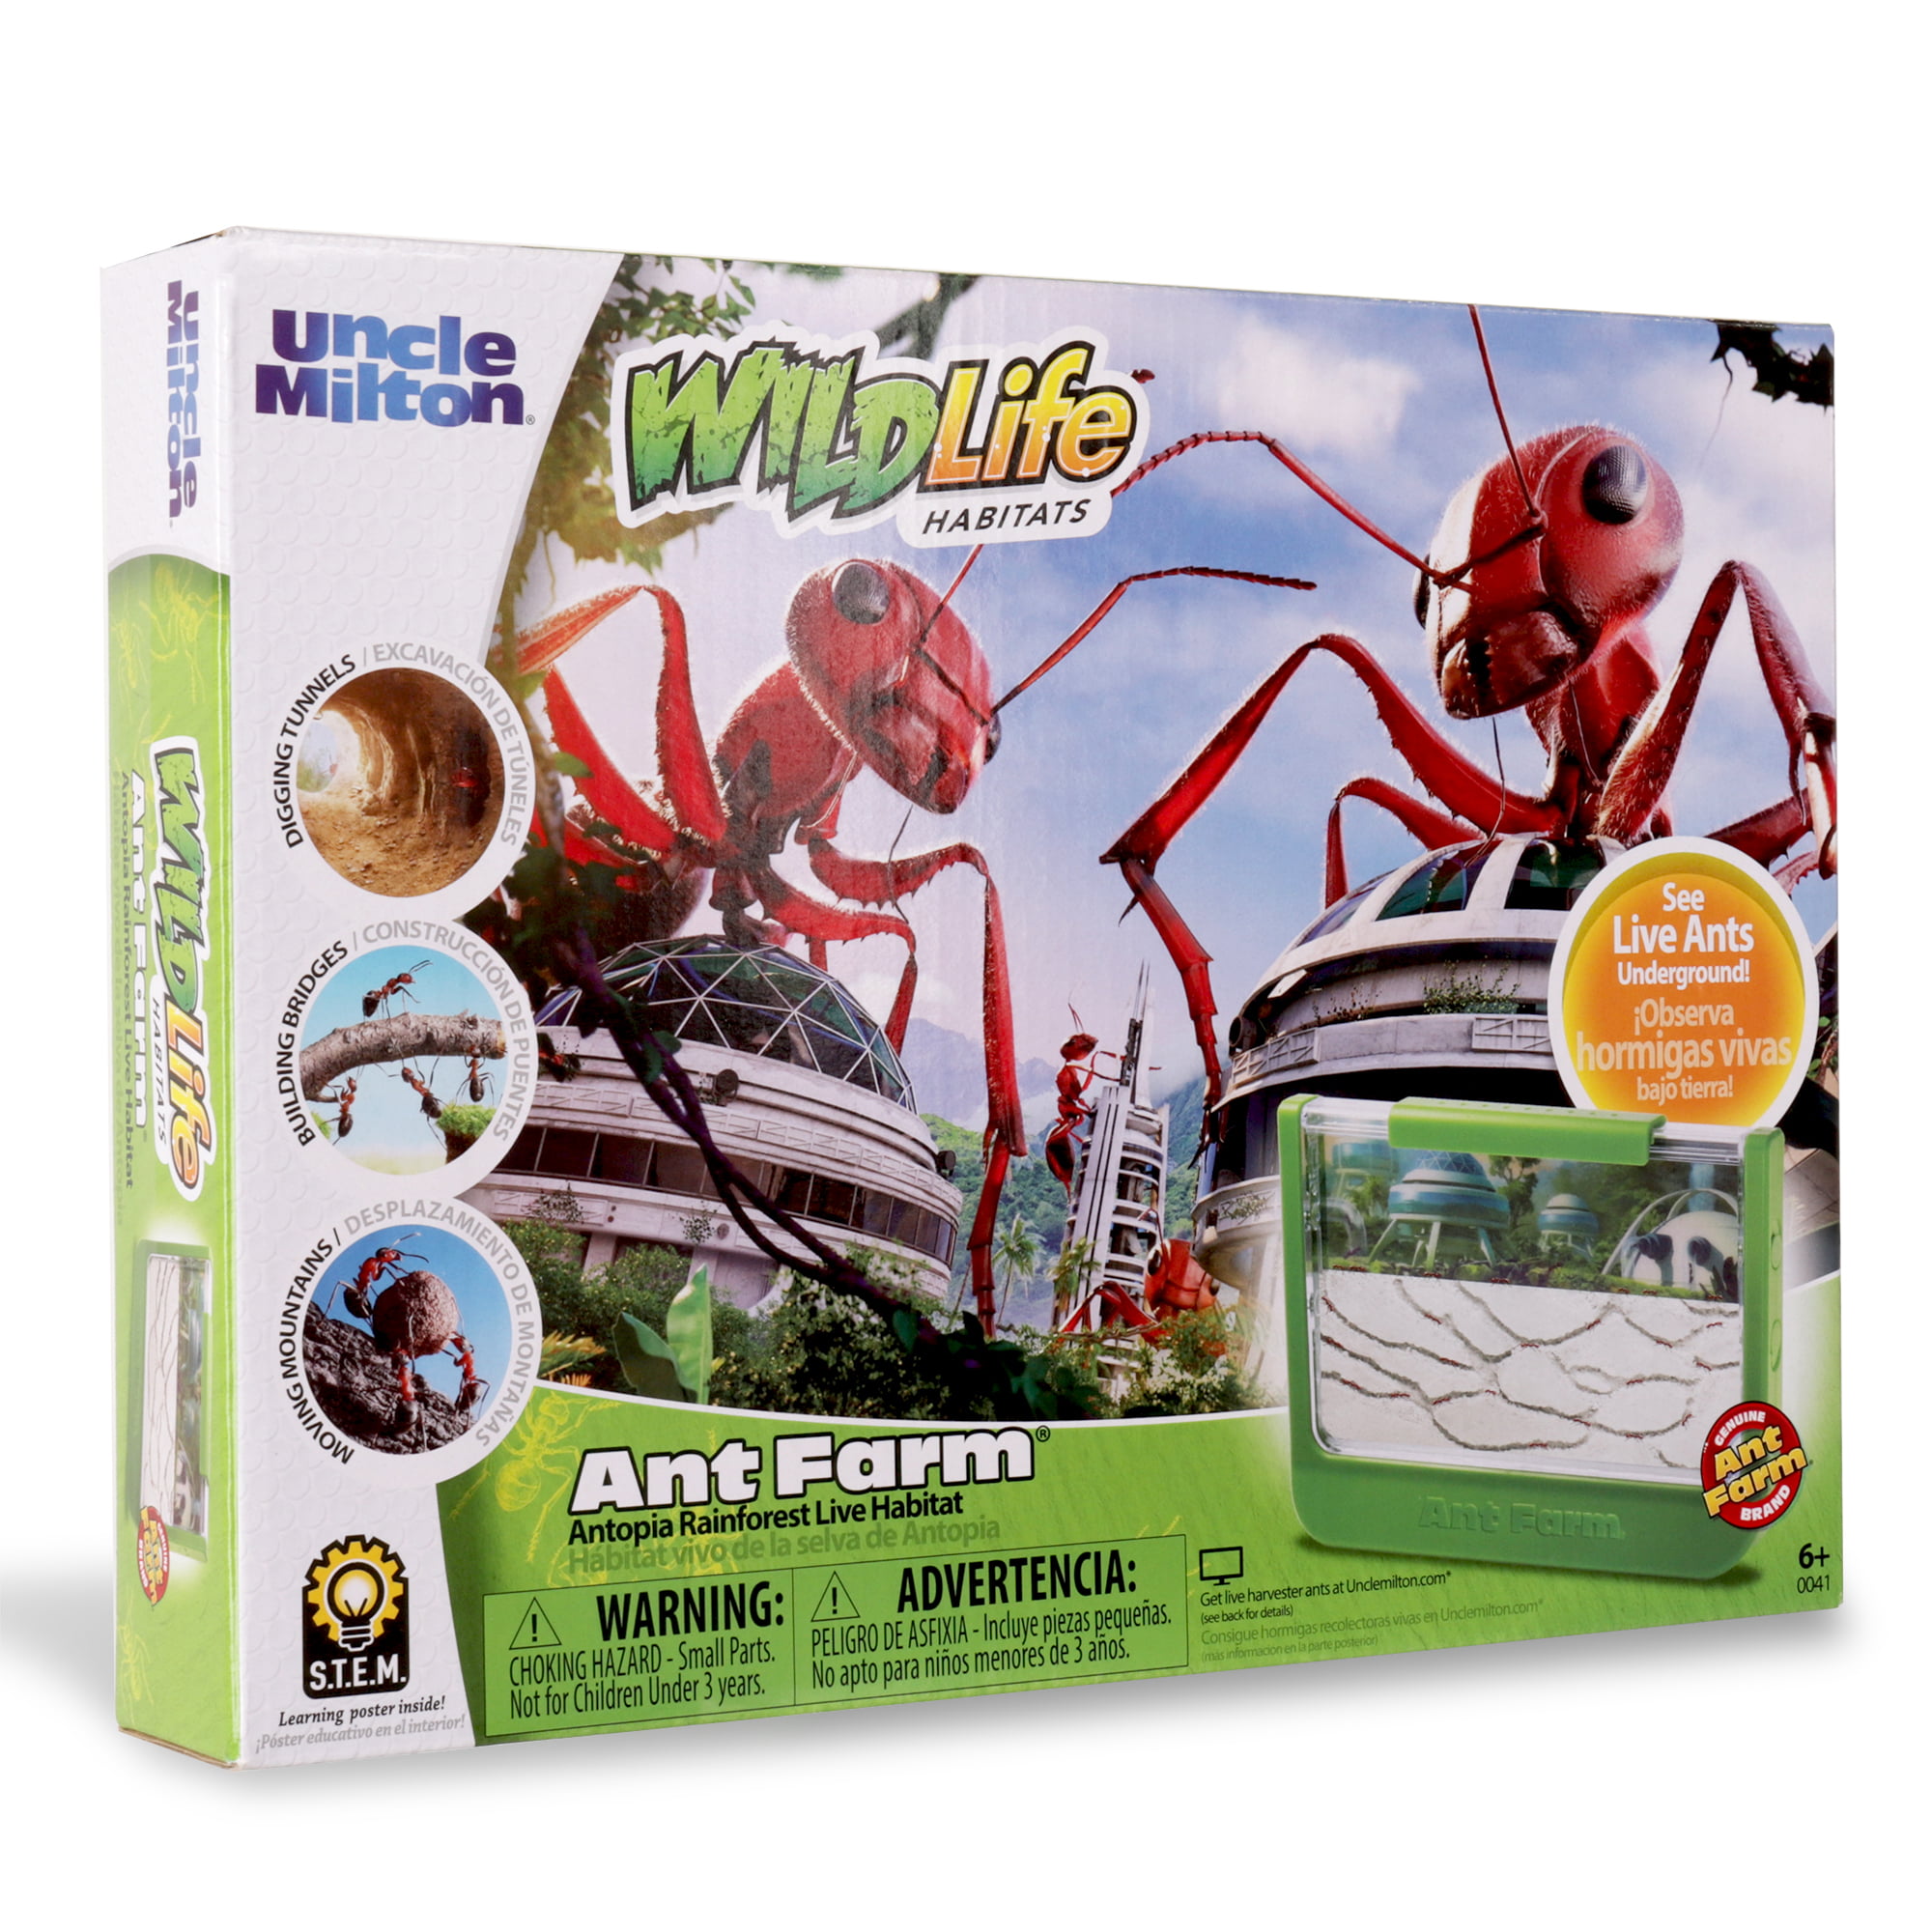 Insect Feeding Castle Ant World Educational Kit Toy Ant Farm for Kids with Ants 24x14x4.5cm LLDKA Ant Farm with Ants and Queen